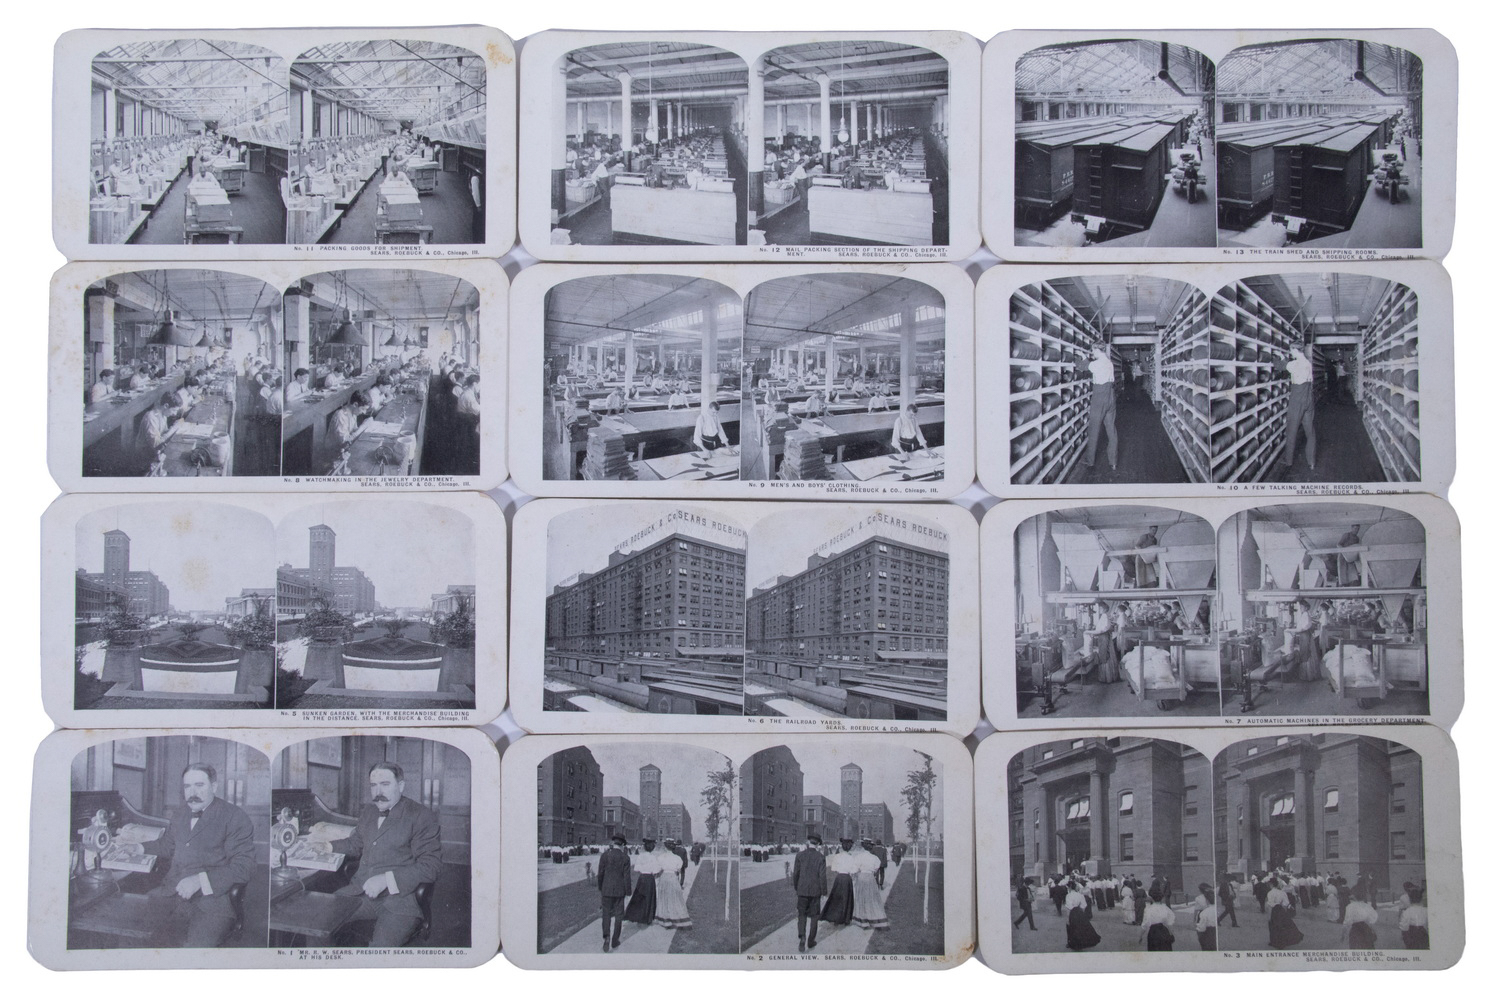 SET OF STEREOVIEW CARDS "A Trip